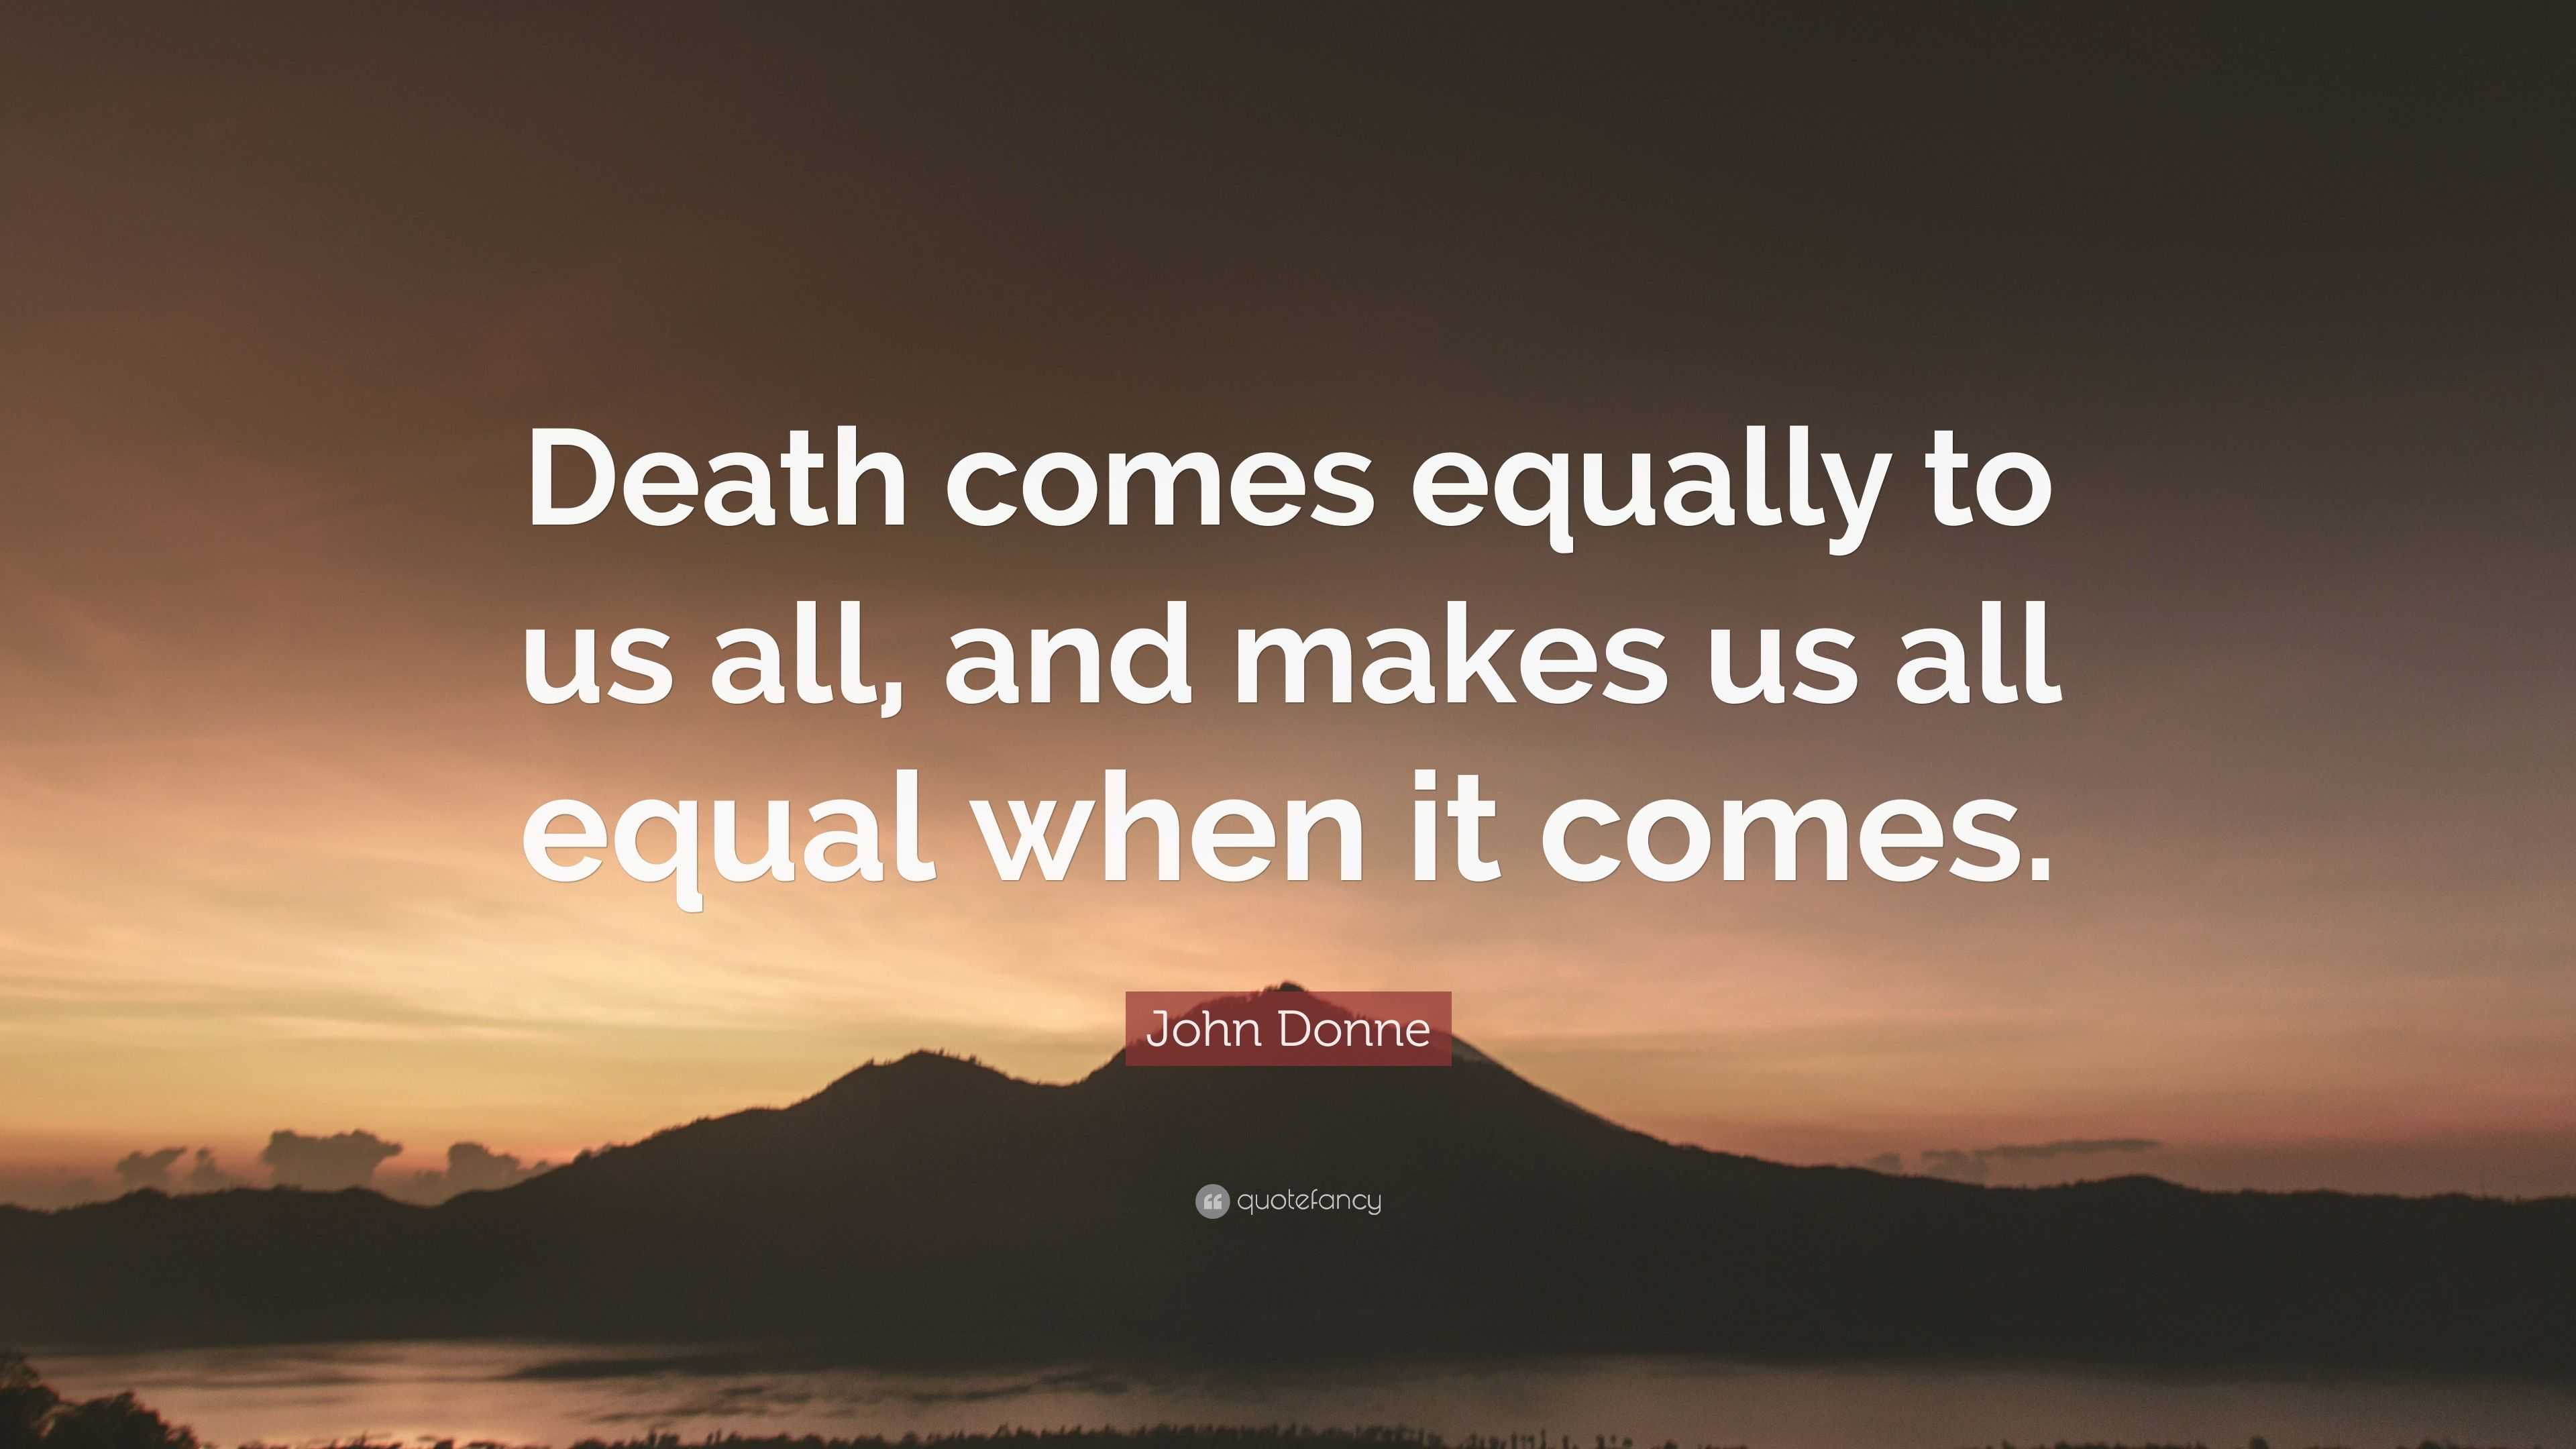 John Donne Quote: “Death comes equally to us all, and makes us all